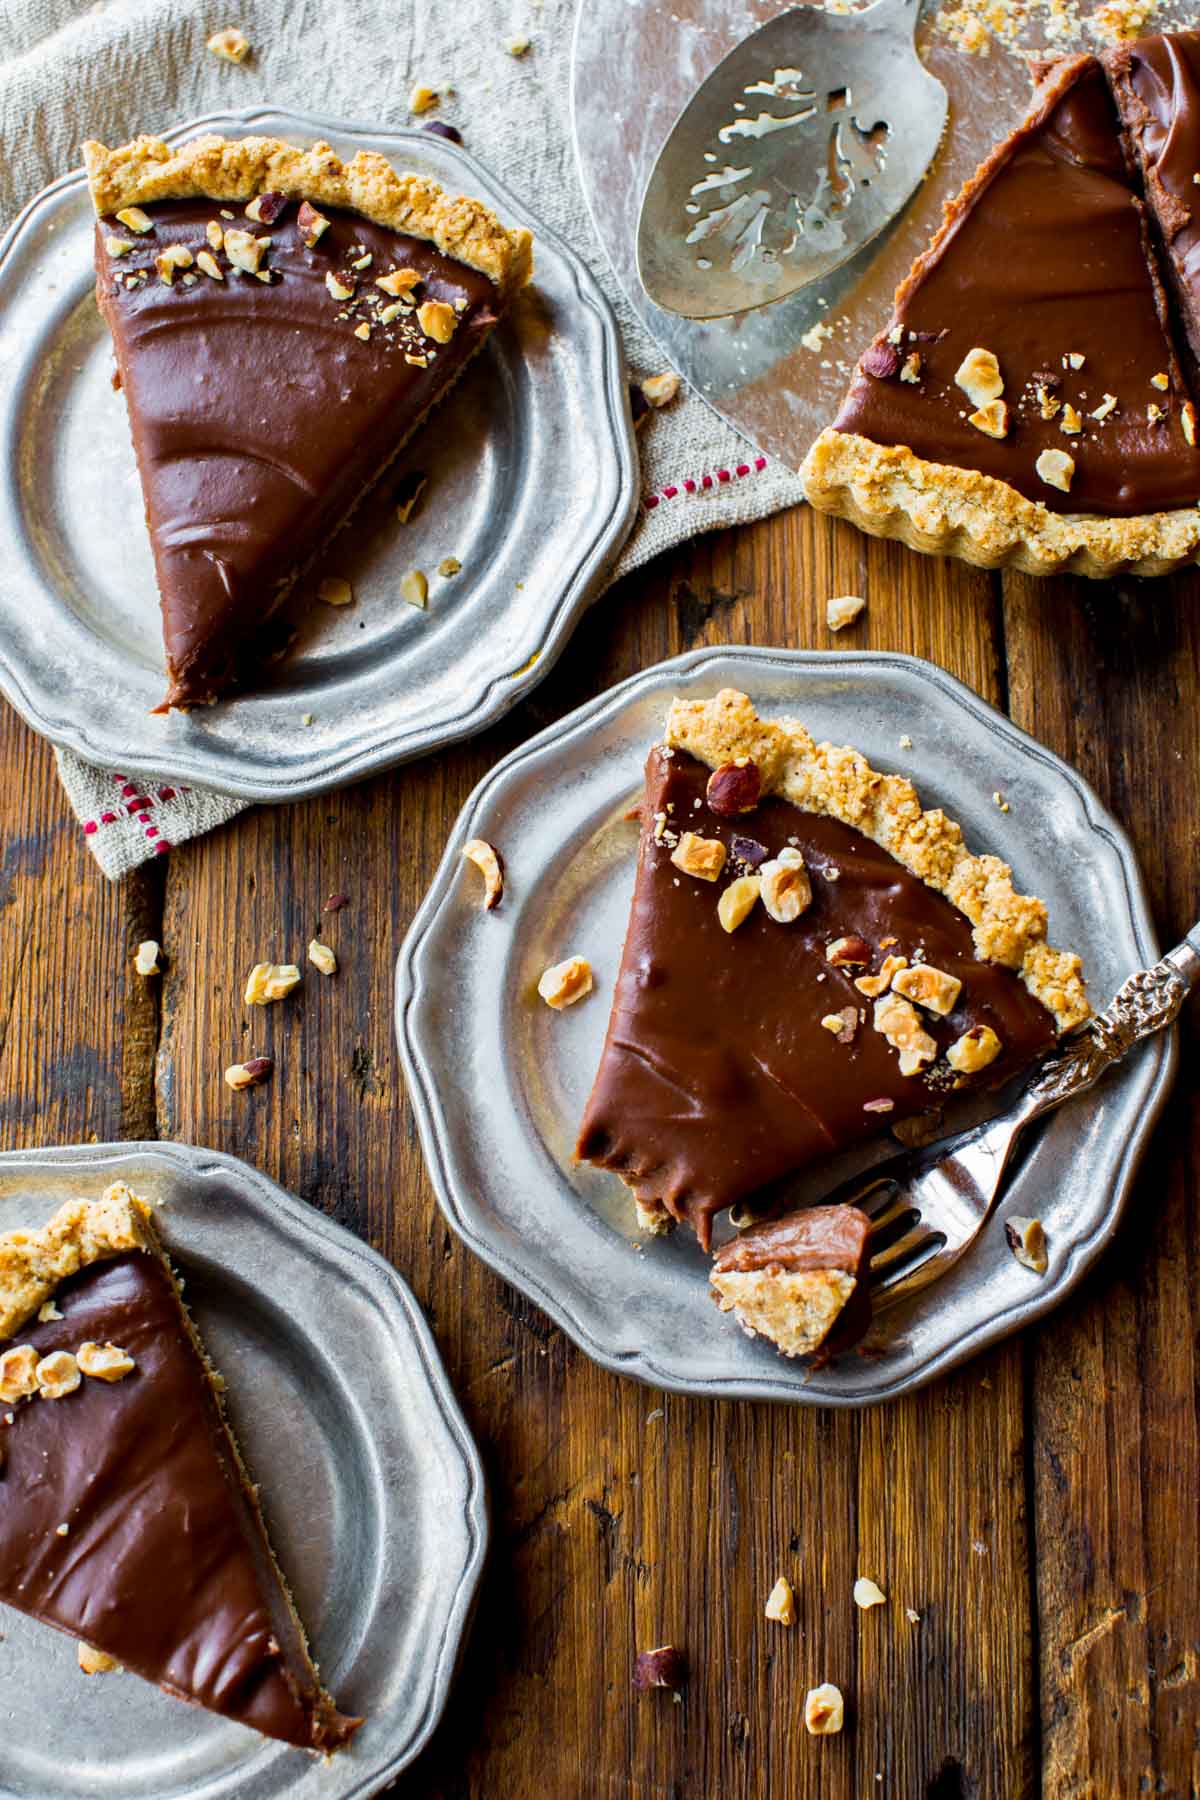 4 slices of Nutella tart on silver plates